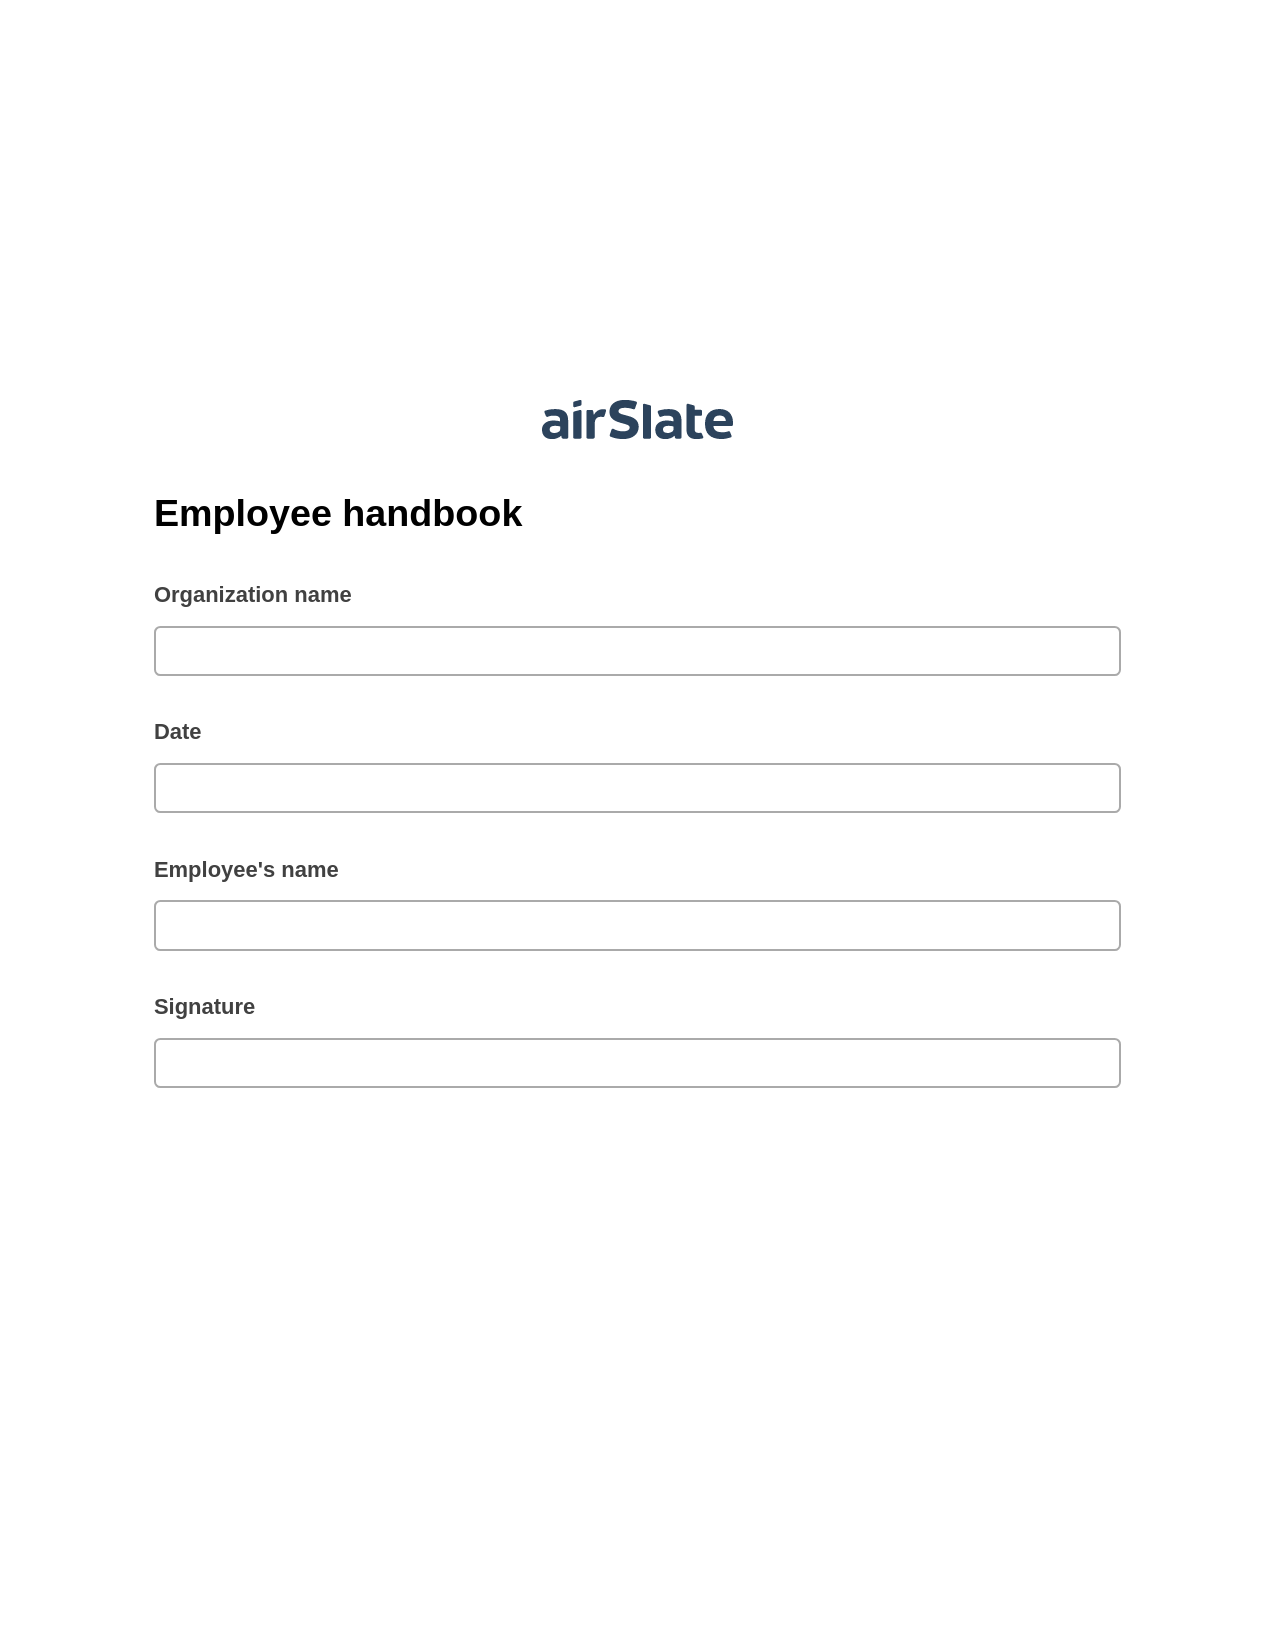 Employee handbook Pre-fill Dropdown from Airtable, System Bot - Create a Slate in another Flow, Export to Excel 365 Bot